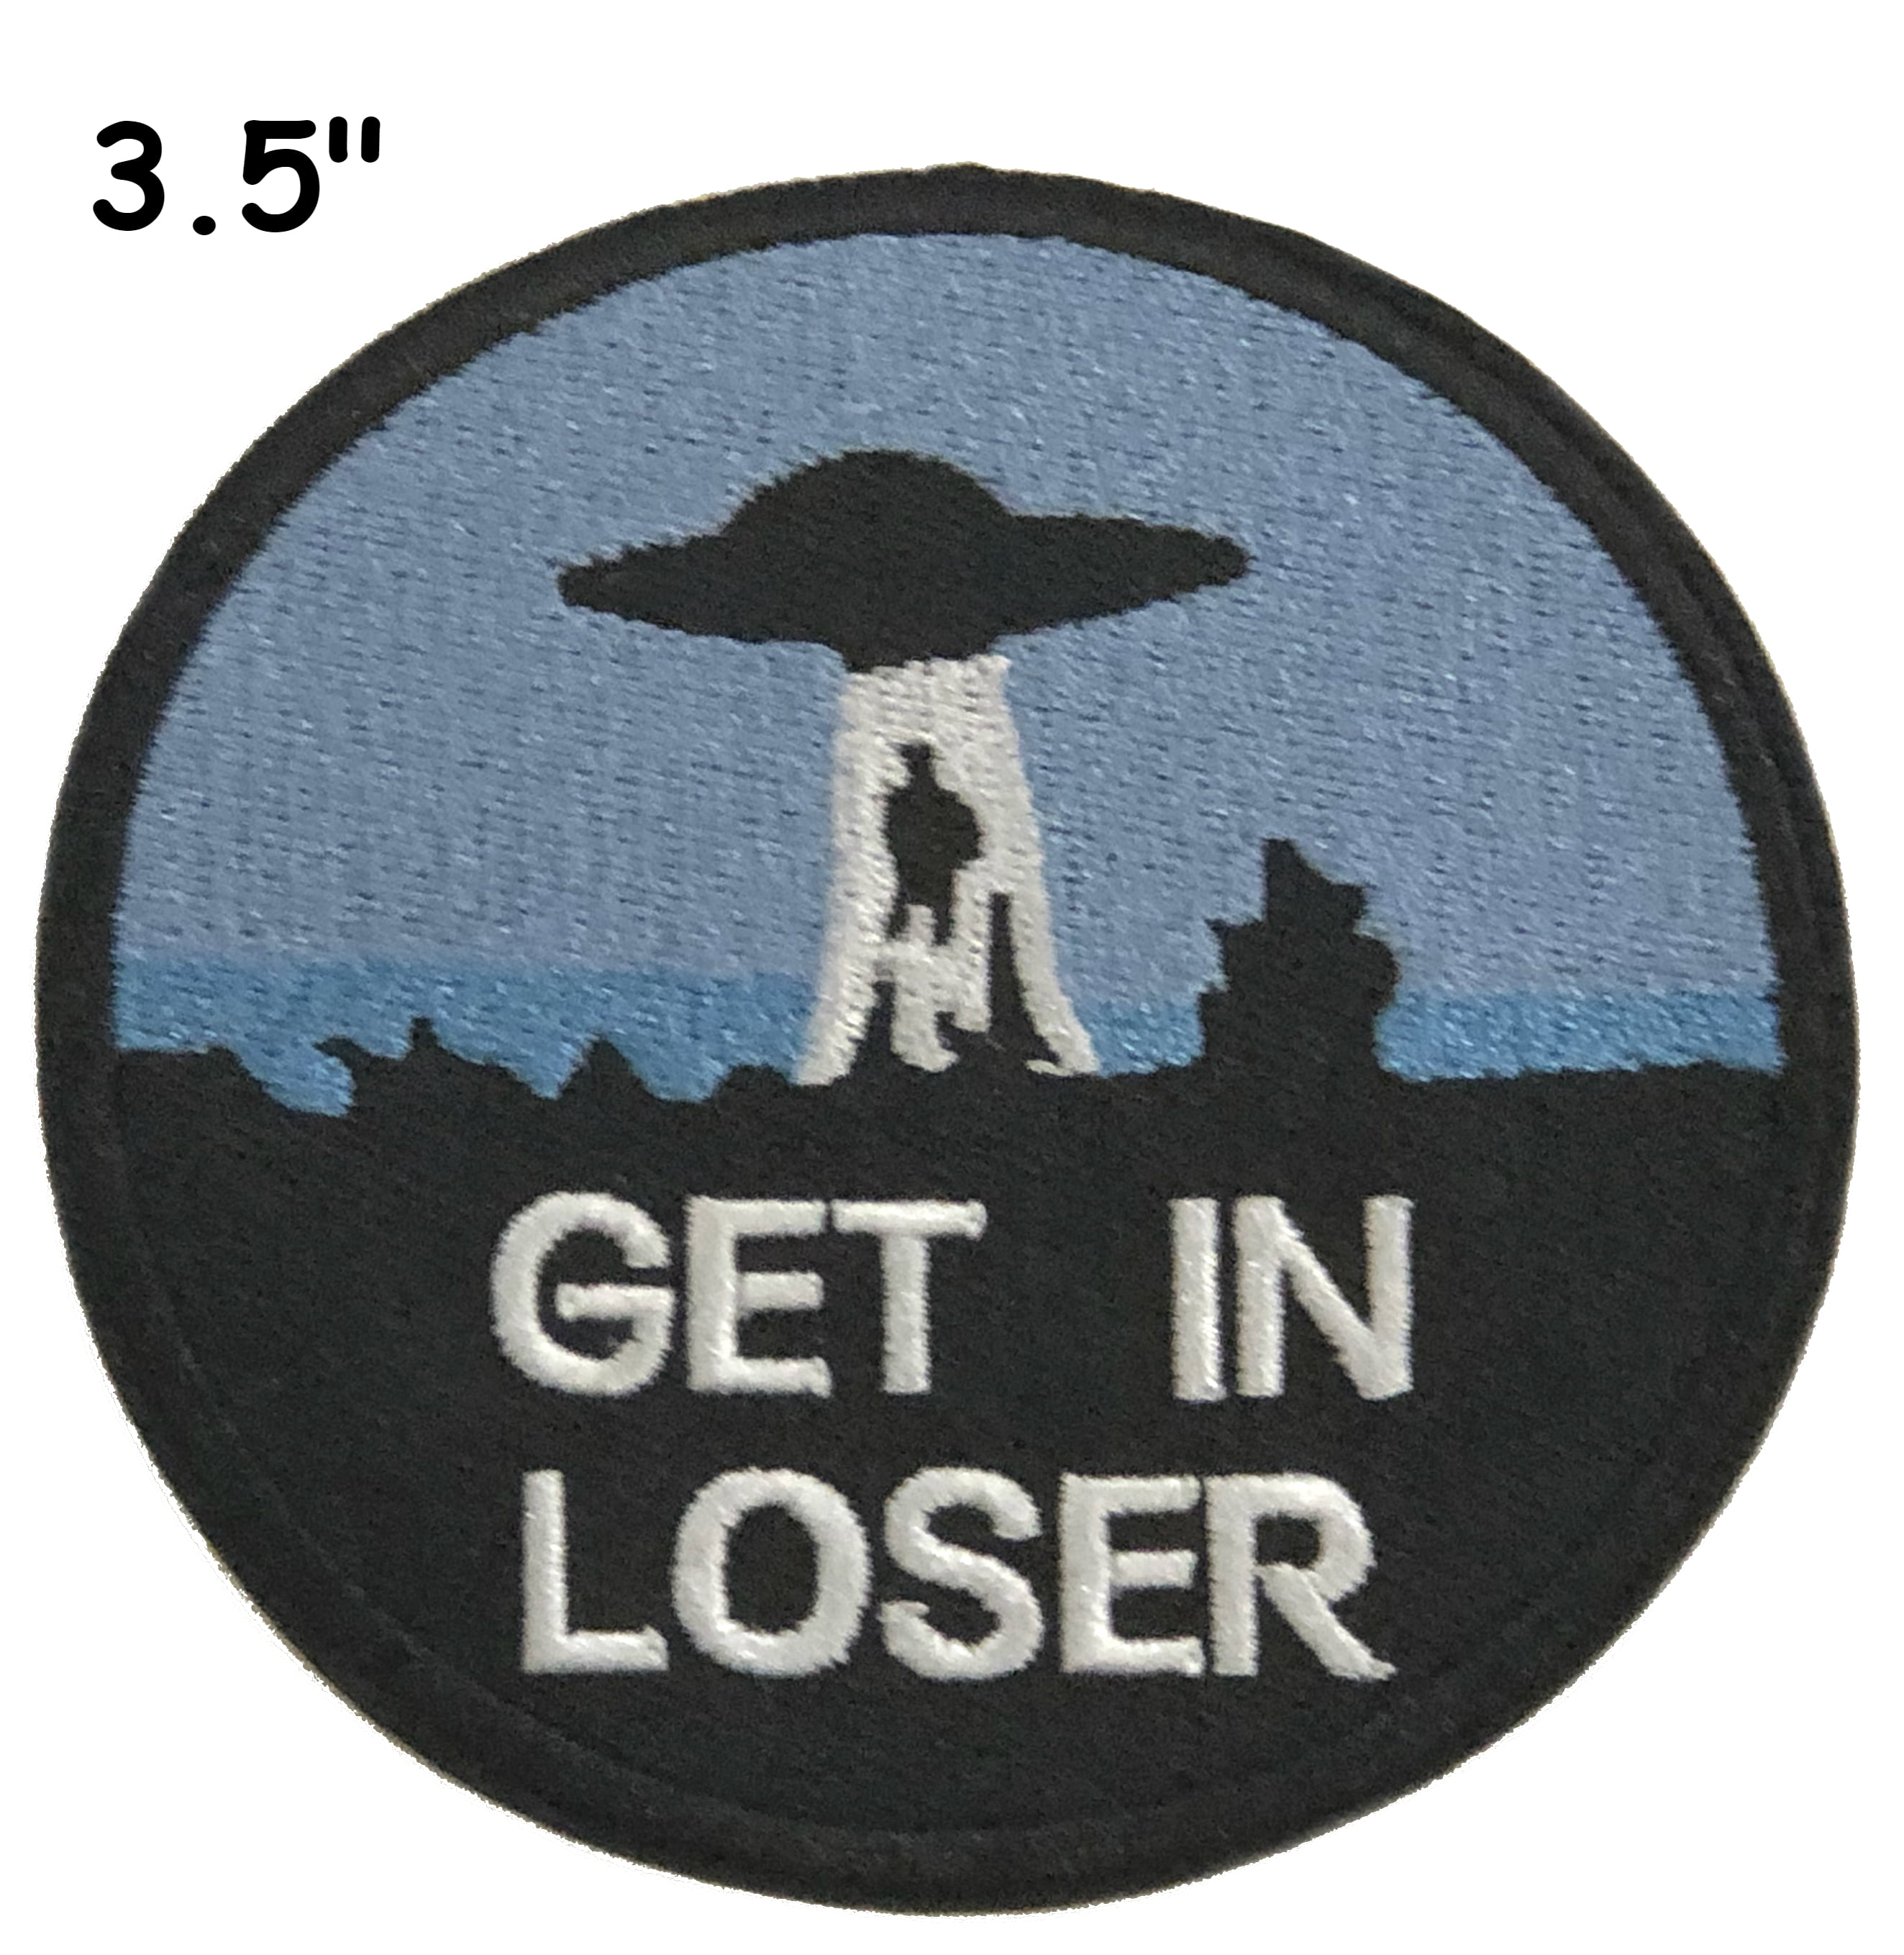 Xfiles I Want To Believe Aliens Vintage Retro Style Iron on Patch Applique 1990s 